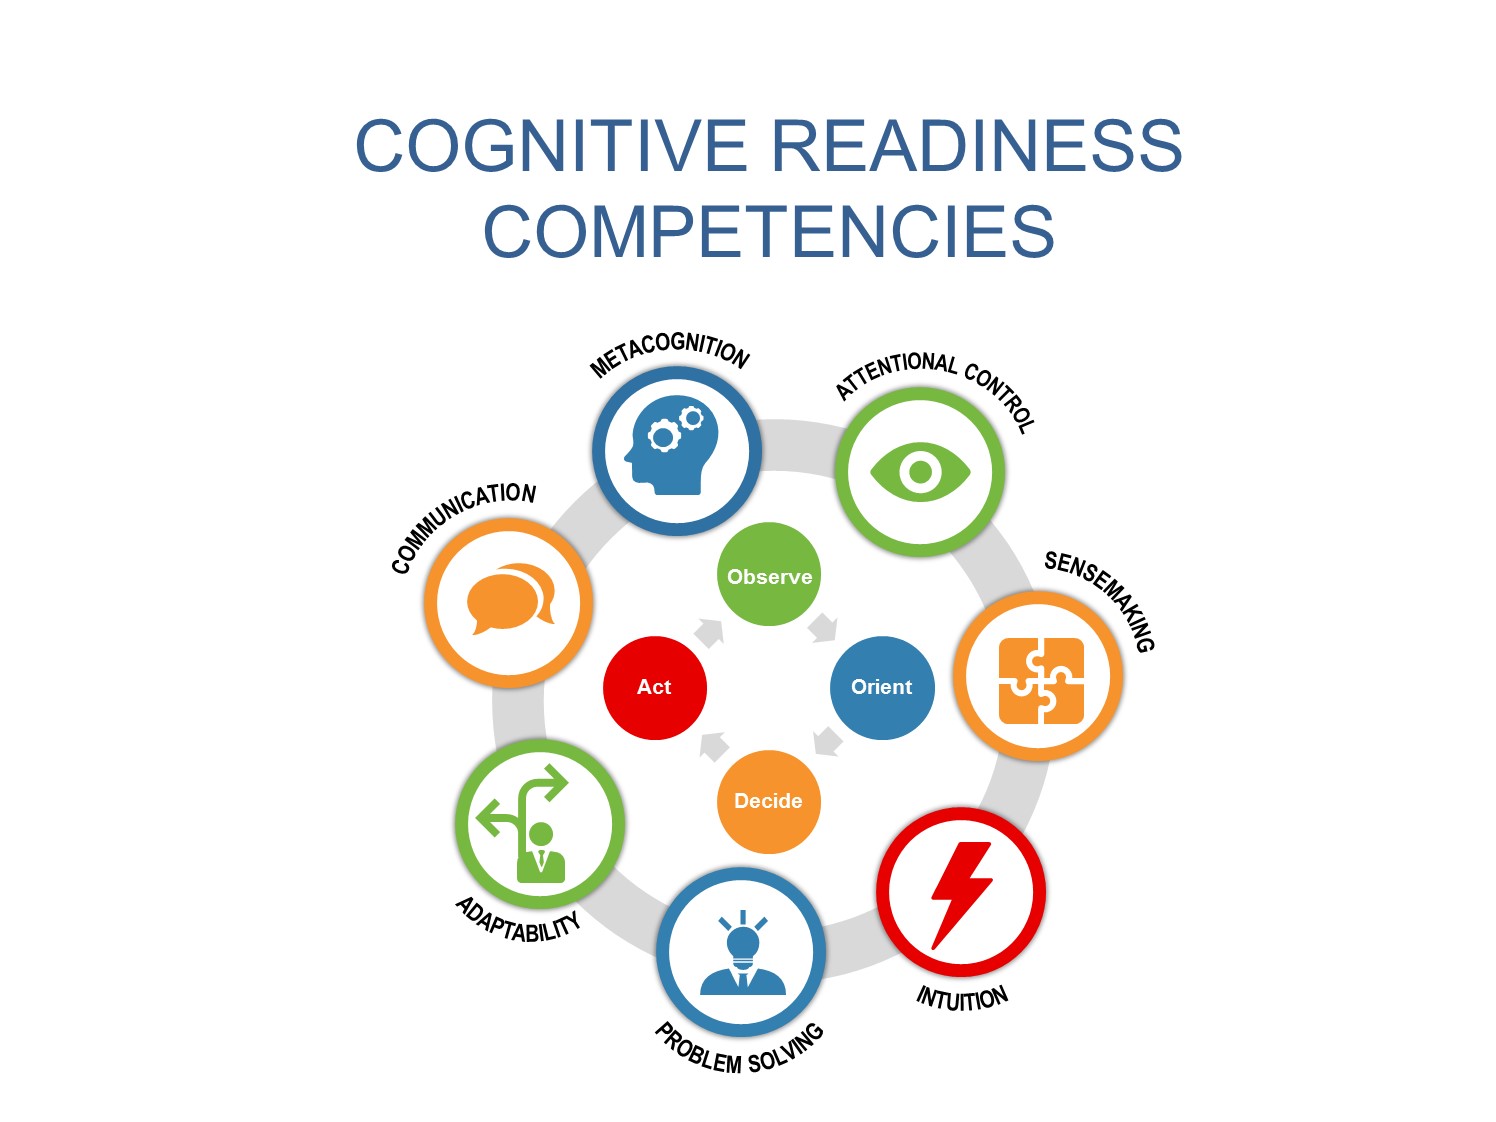 Cognitive Readiness Competencies